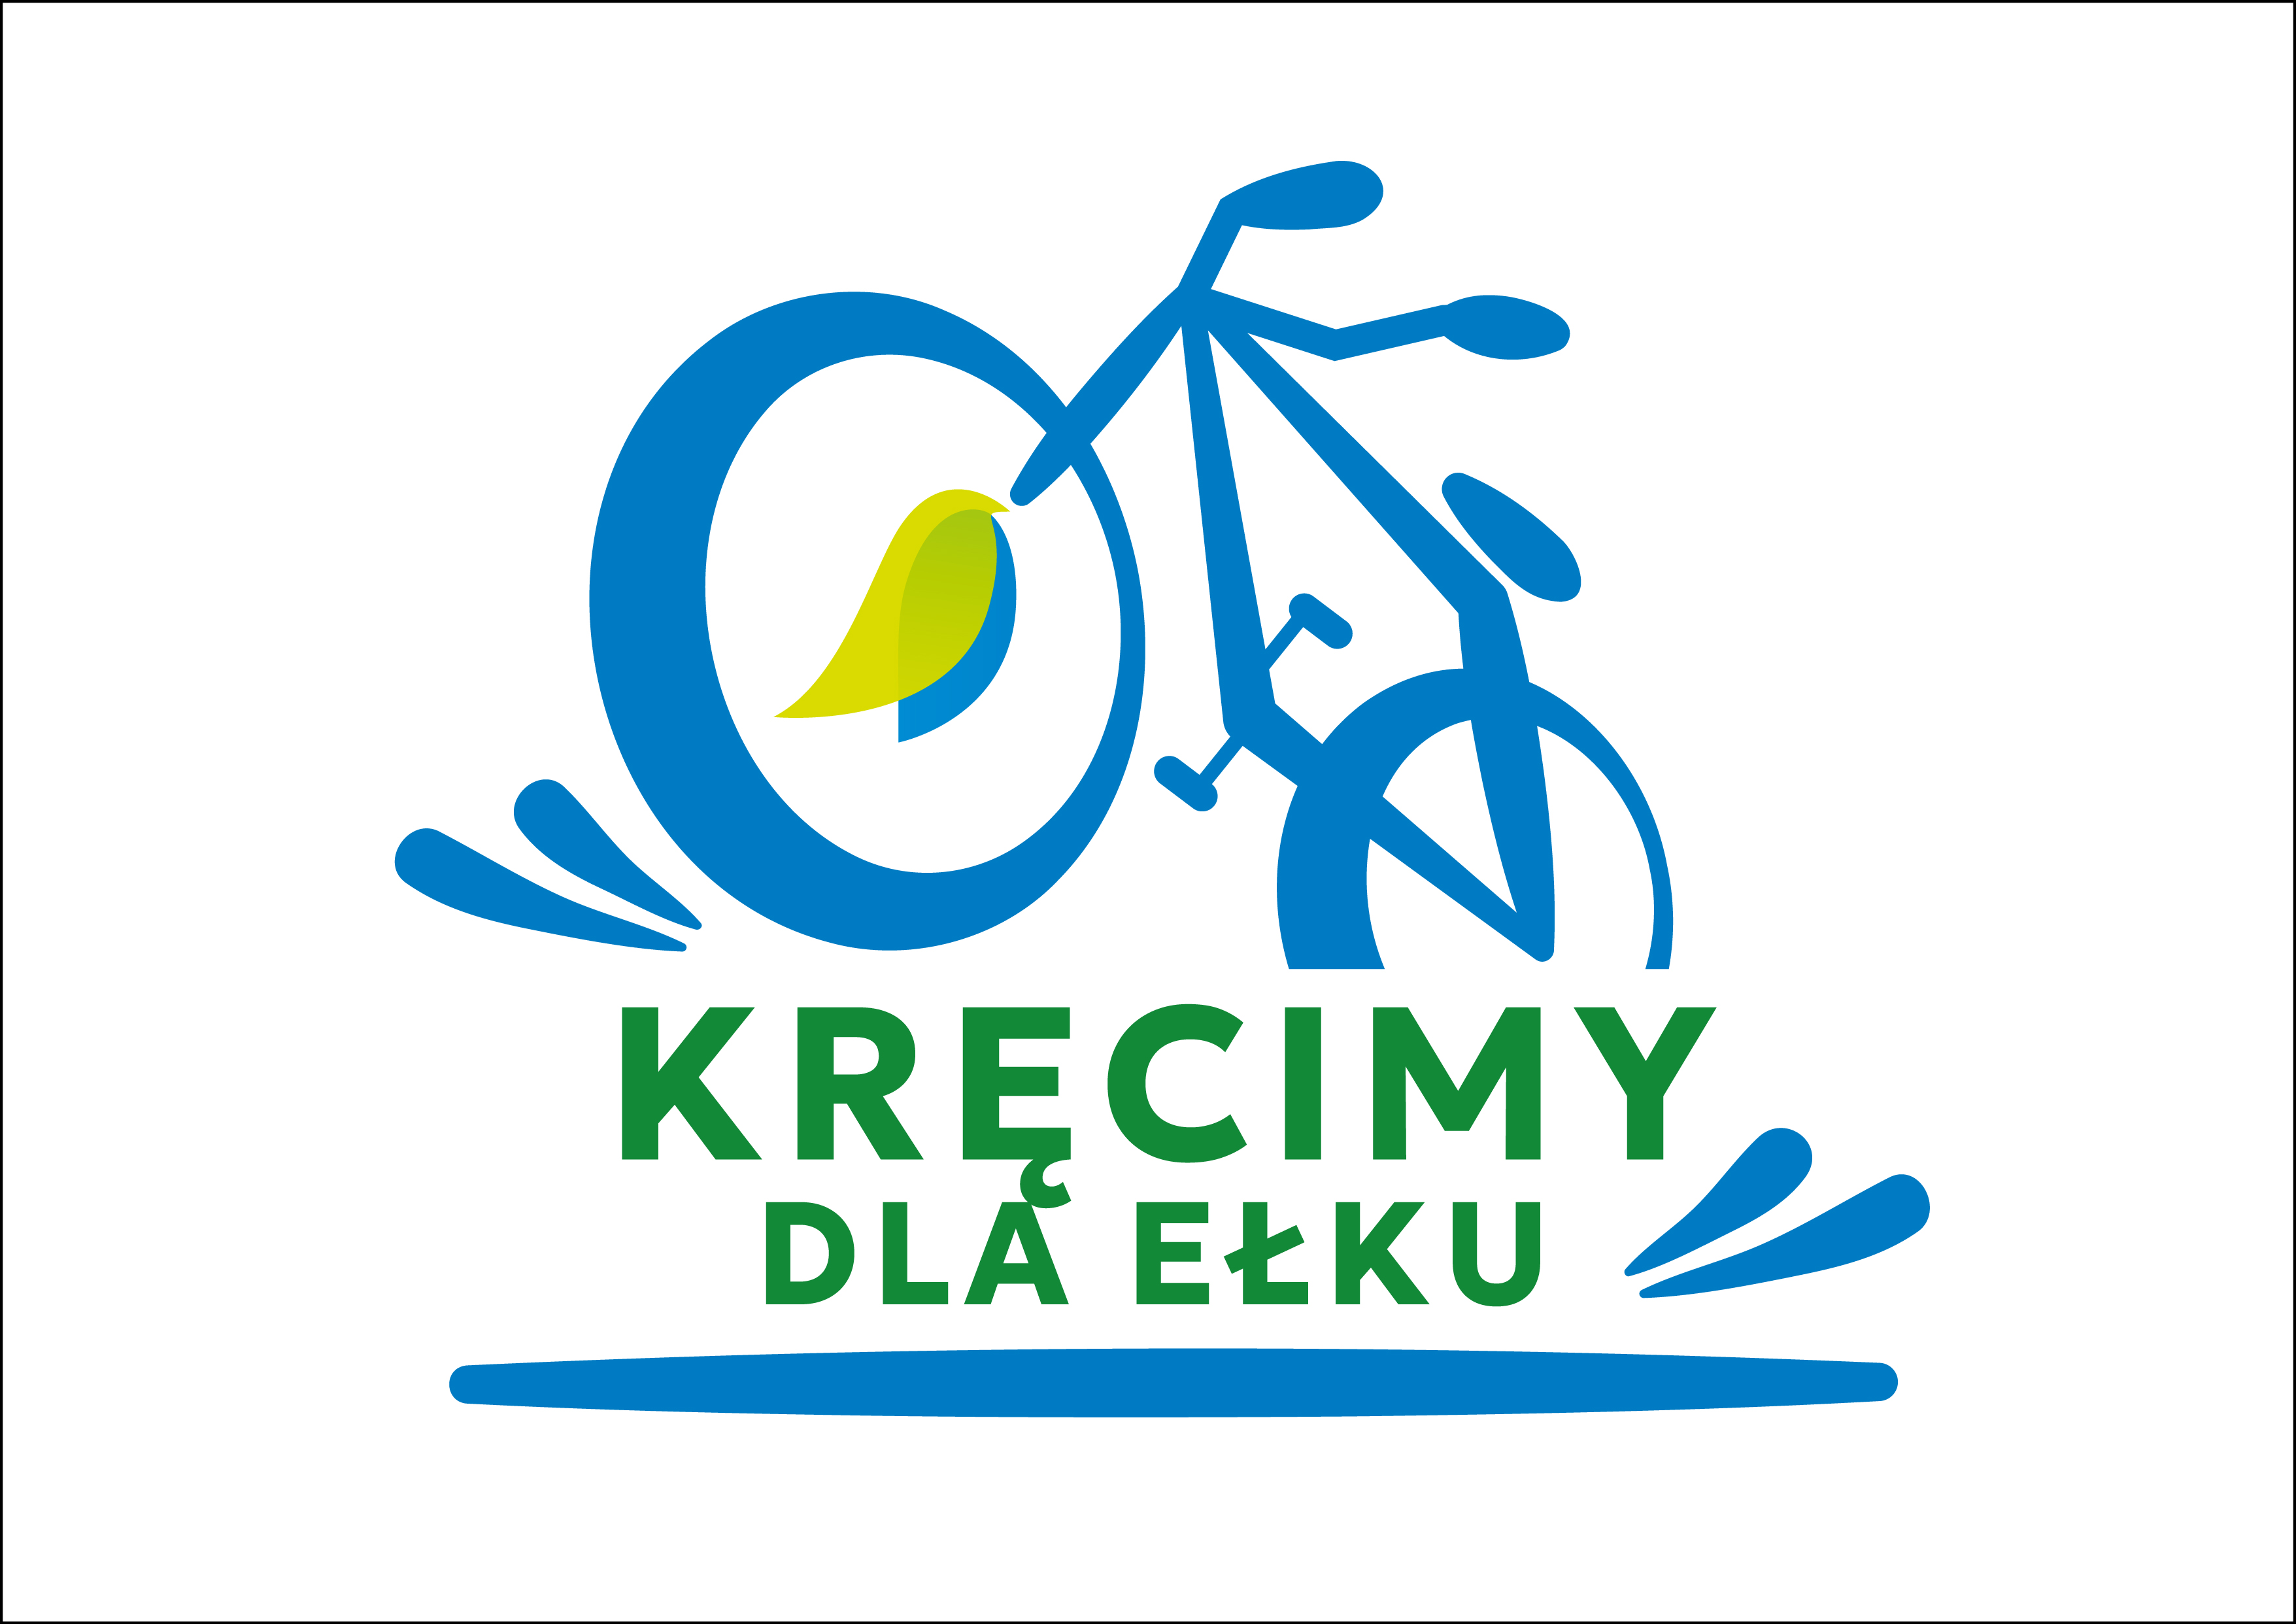 Ełk has a chance to become the Cycling Capital of Polish